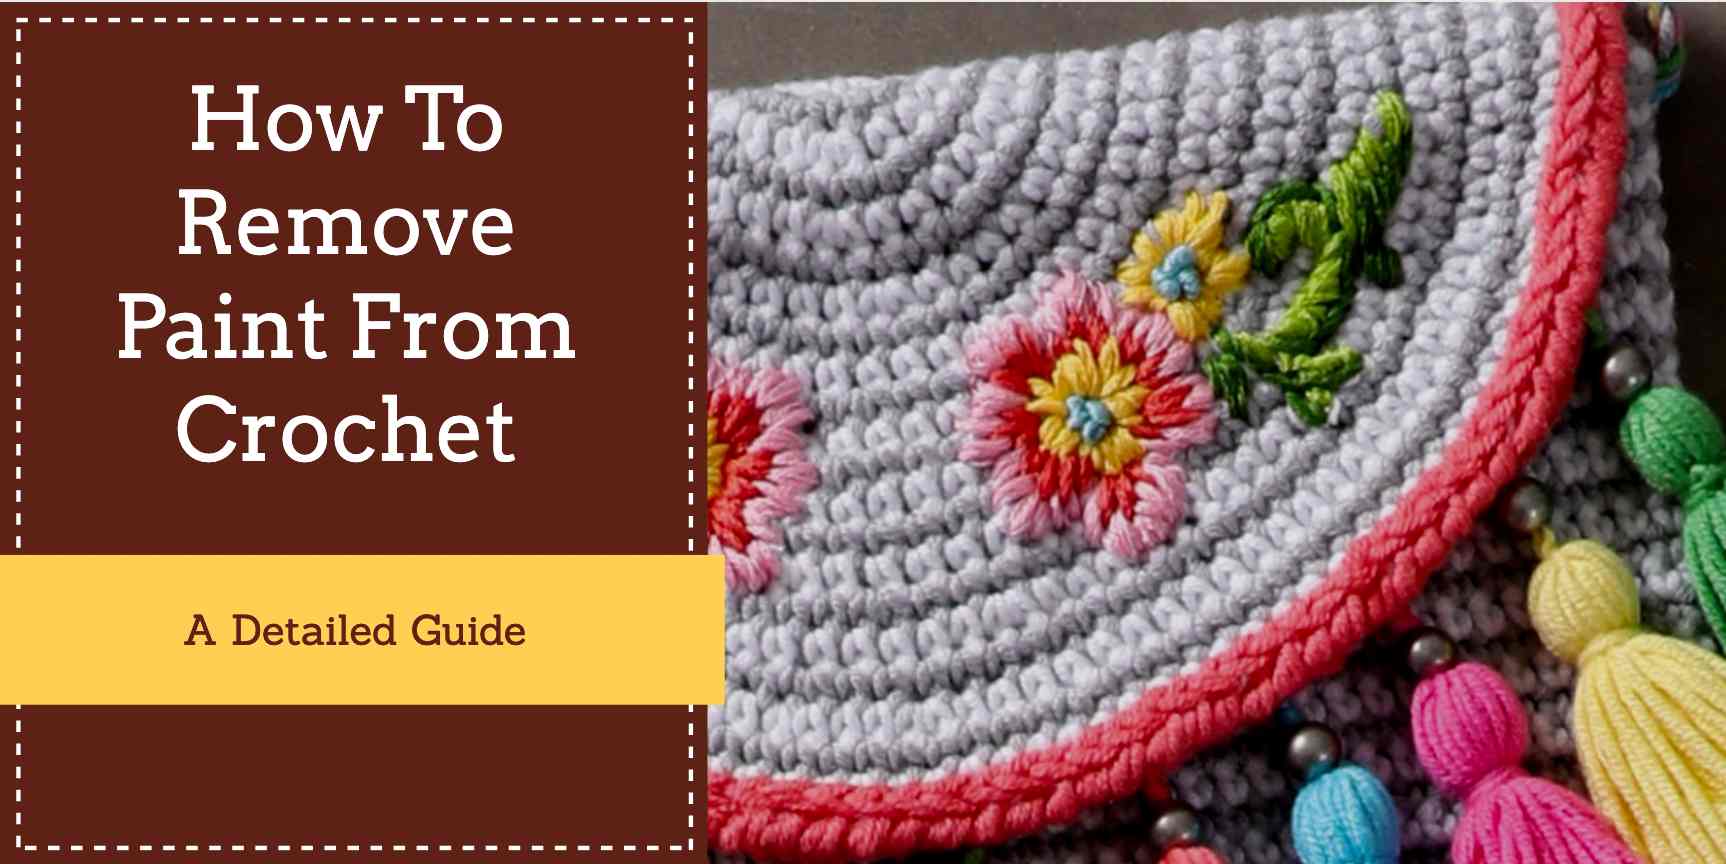 Remove paint from crochet